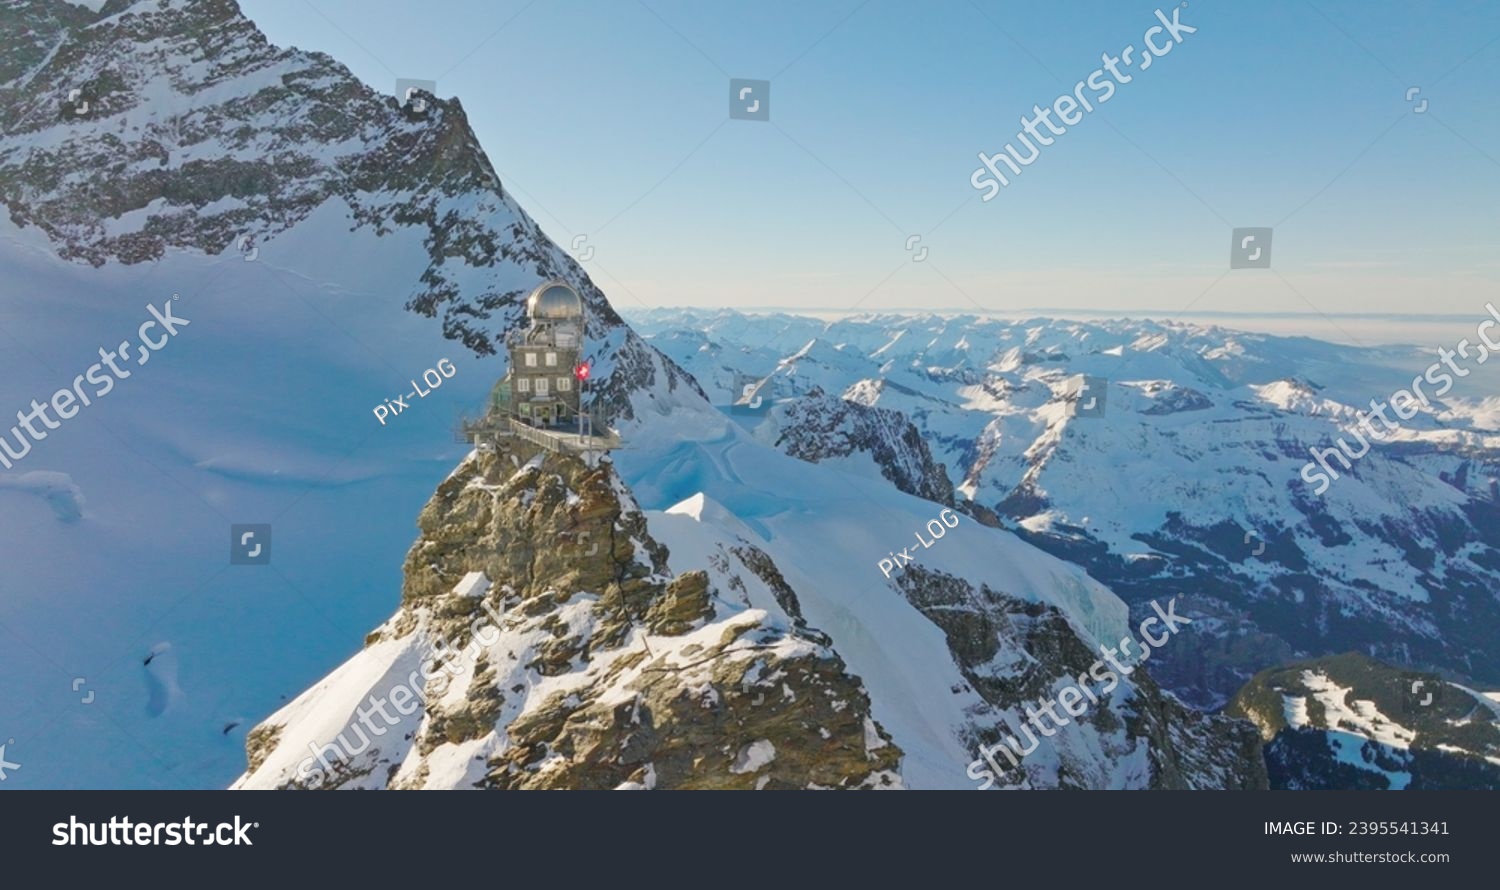 Panoramic landscape of Sphinx observatory and Aletsch glacier on Jungfraujoch Swiss Alps, Switzerland. Jungfrau top of europe in interlaken one of the highest mountain in the world on winter sunny day #2395541341